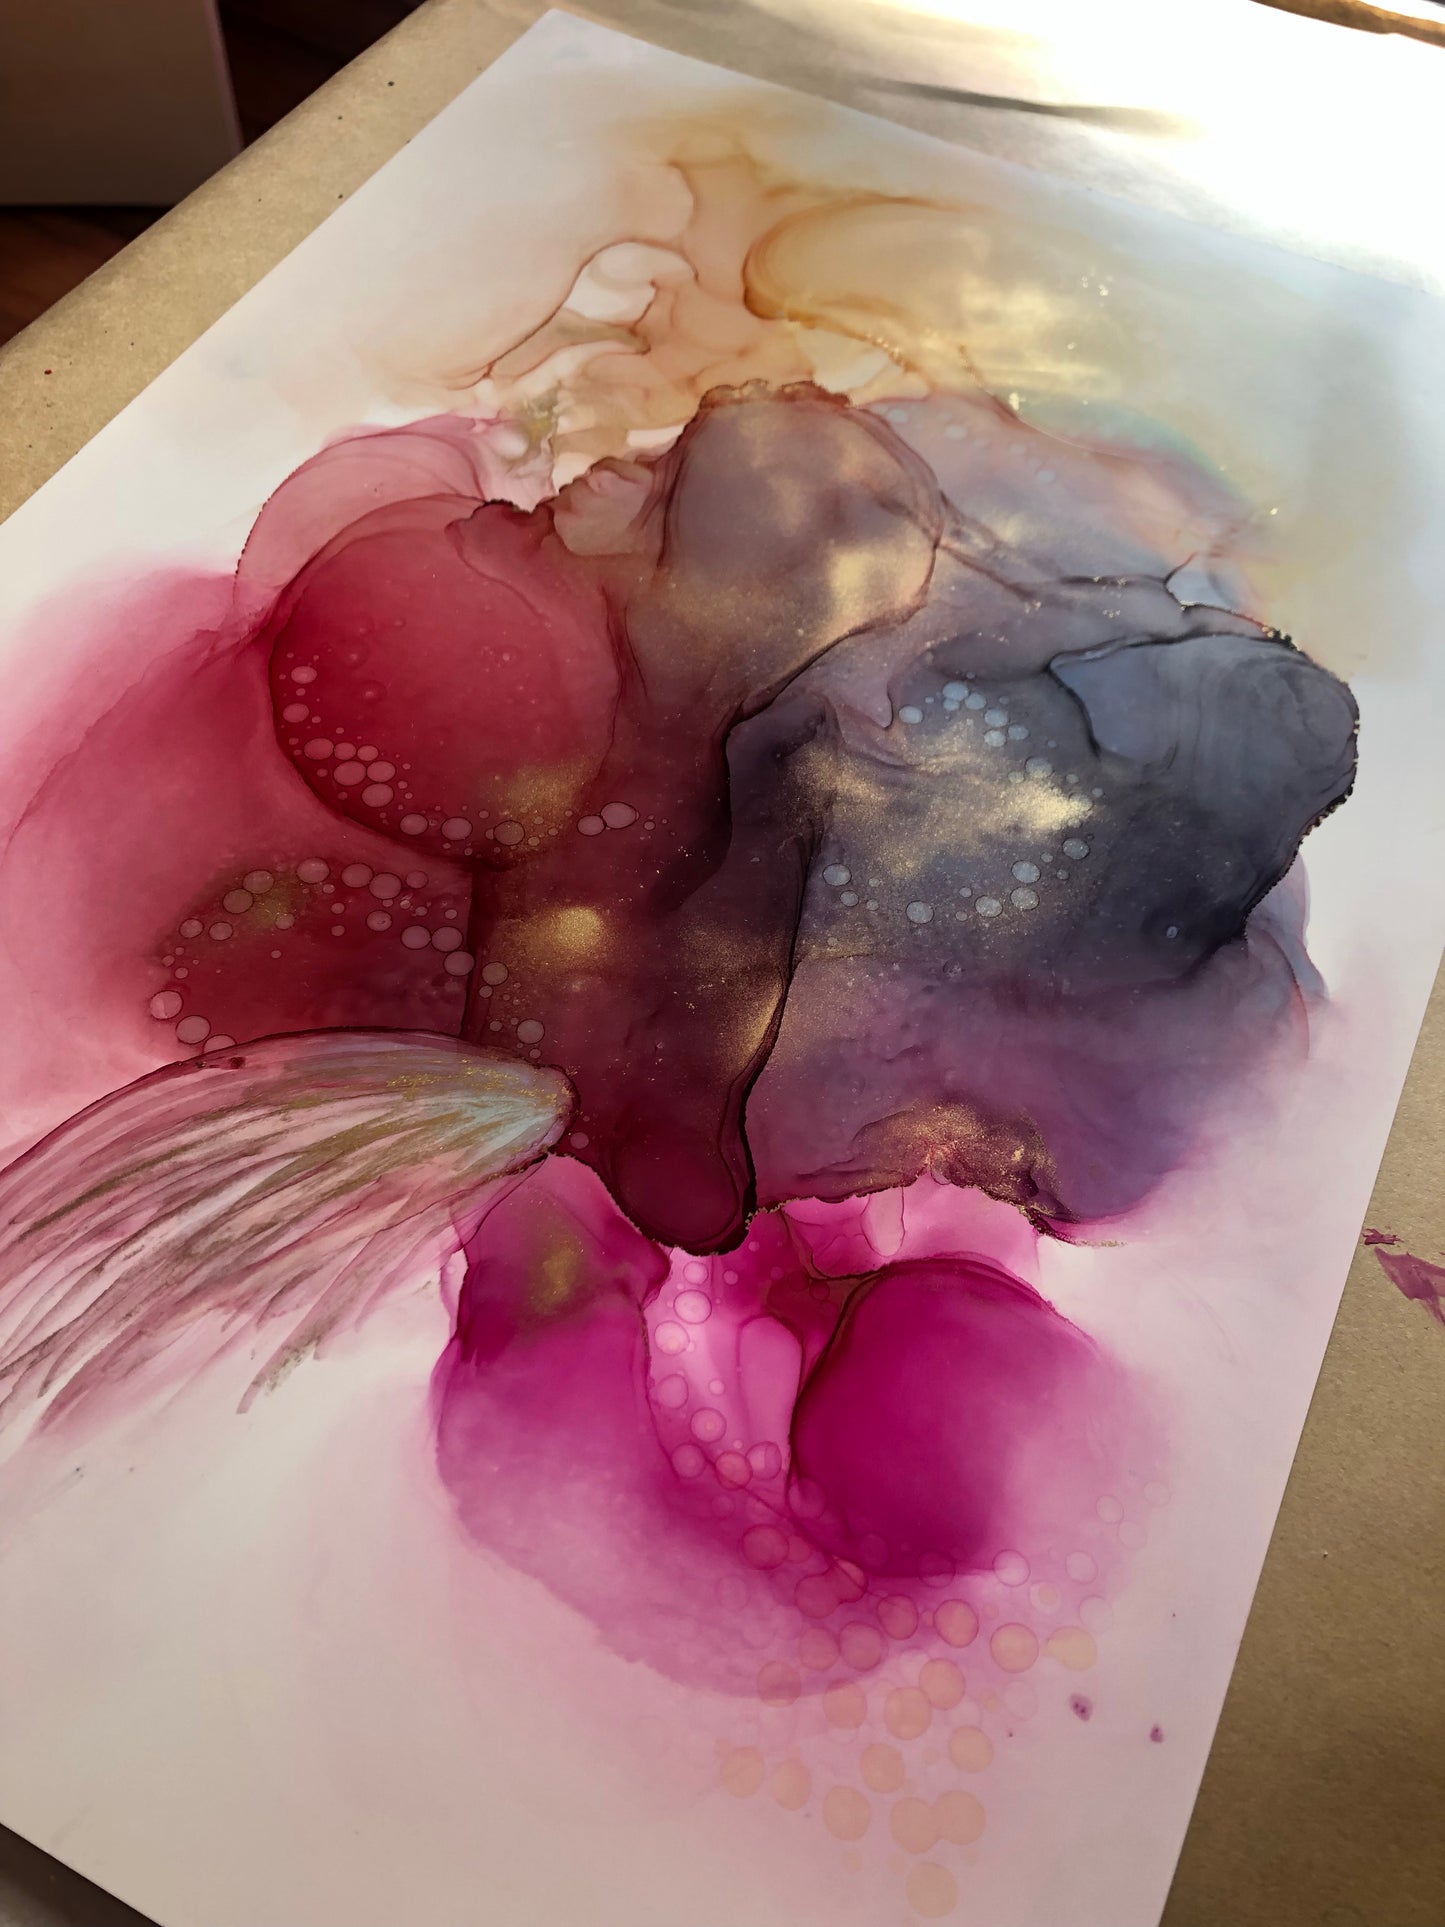 Abstract alcohol ink painting 'Joyous' - Aesthetic Alchemy Art